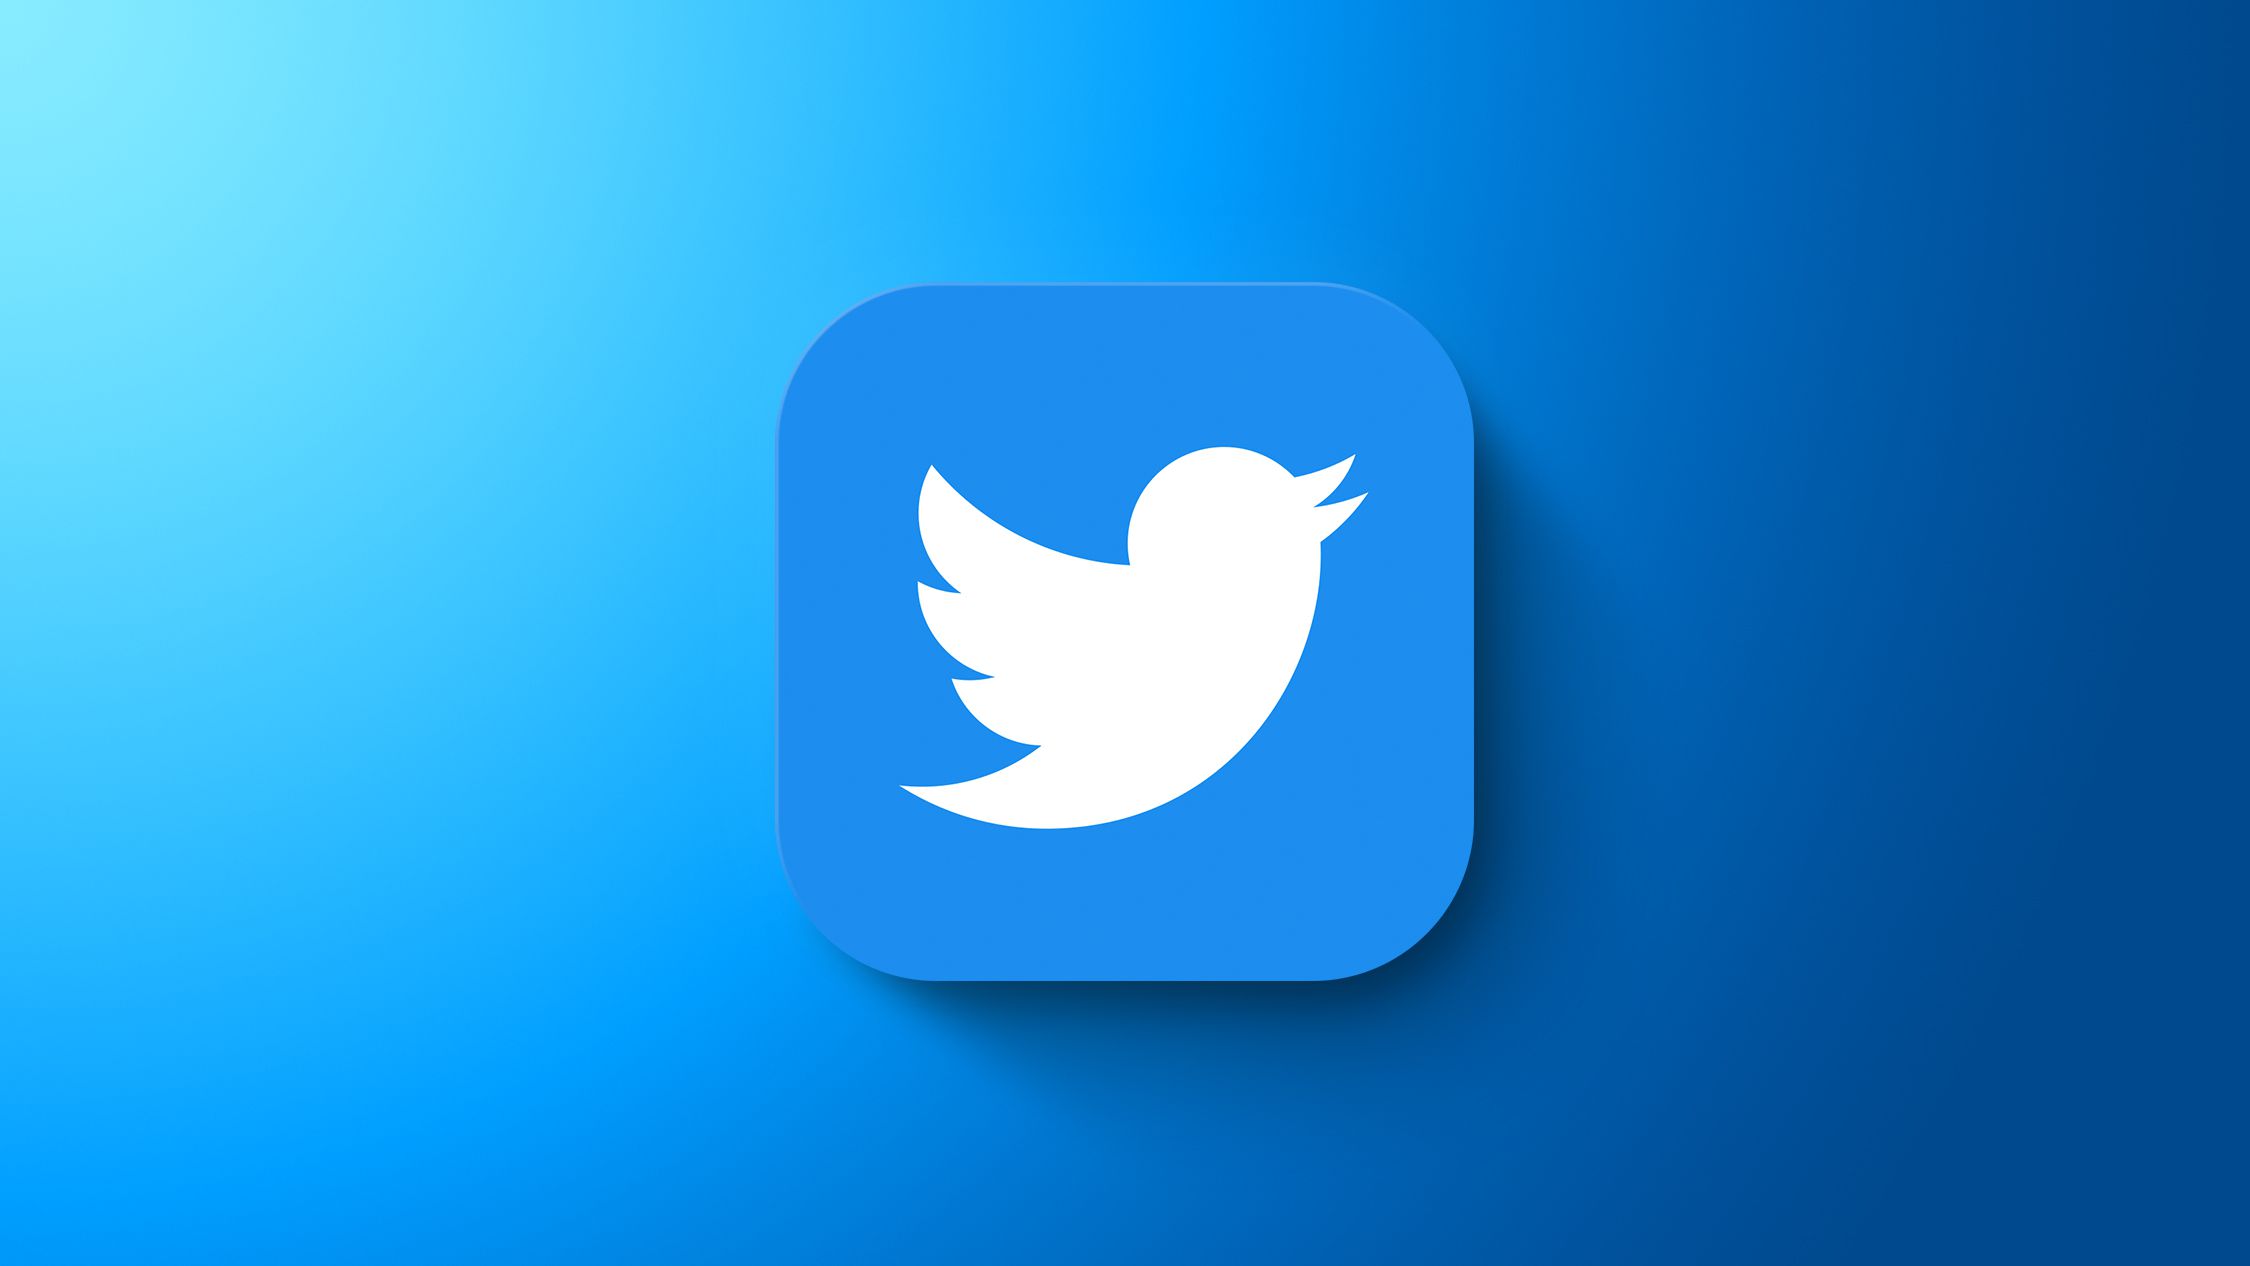 Twitter to Add 'Official' Label to Some Accounts With Original Verification Chec..